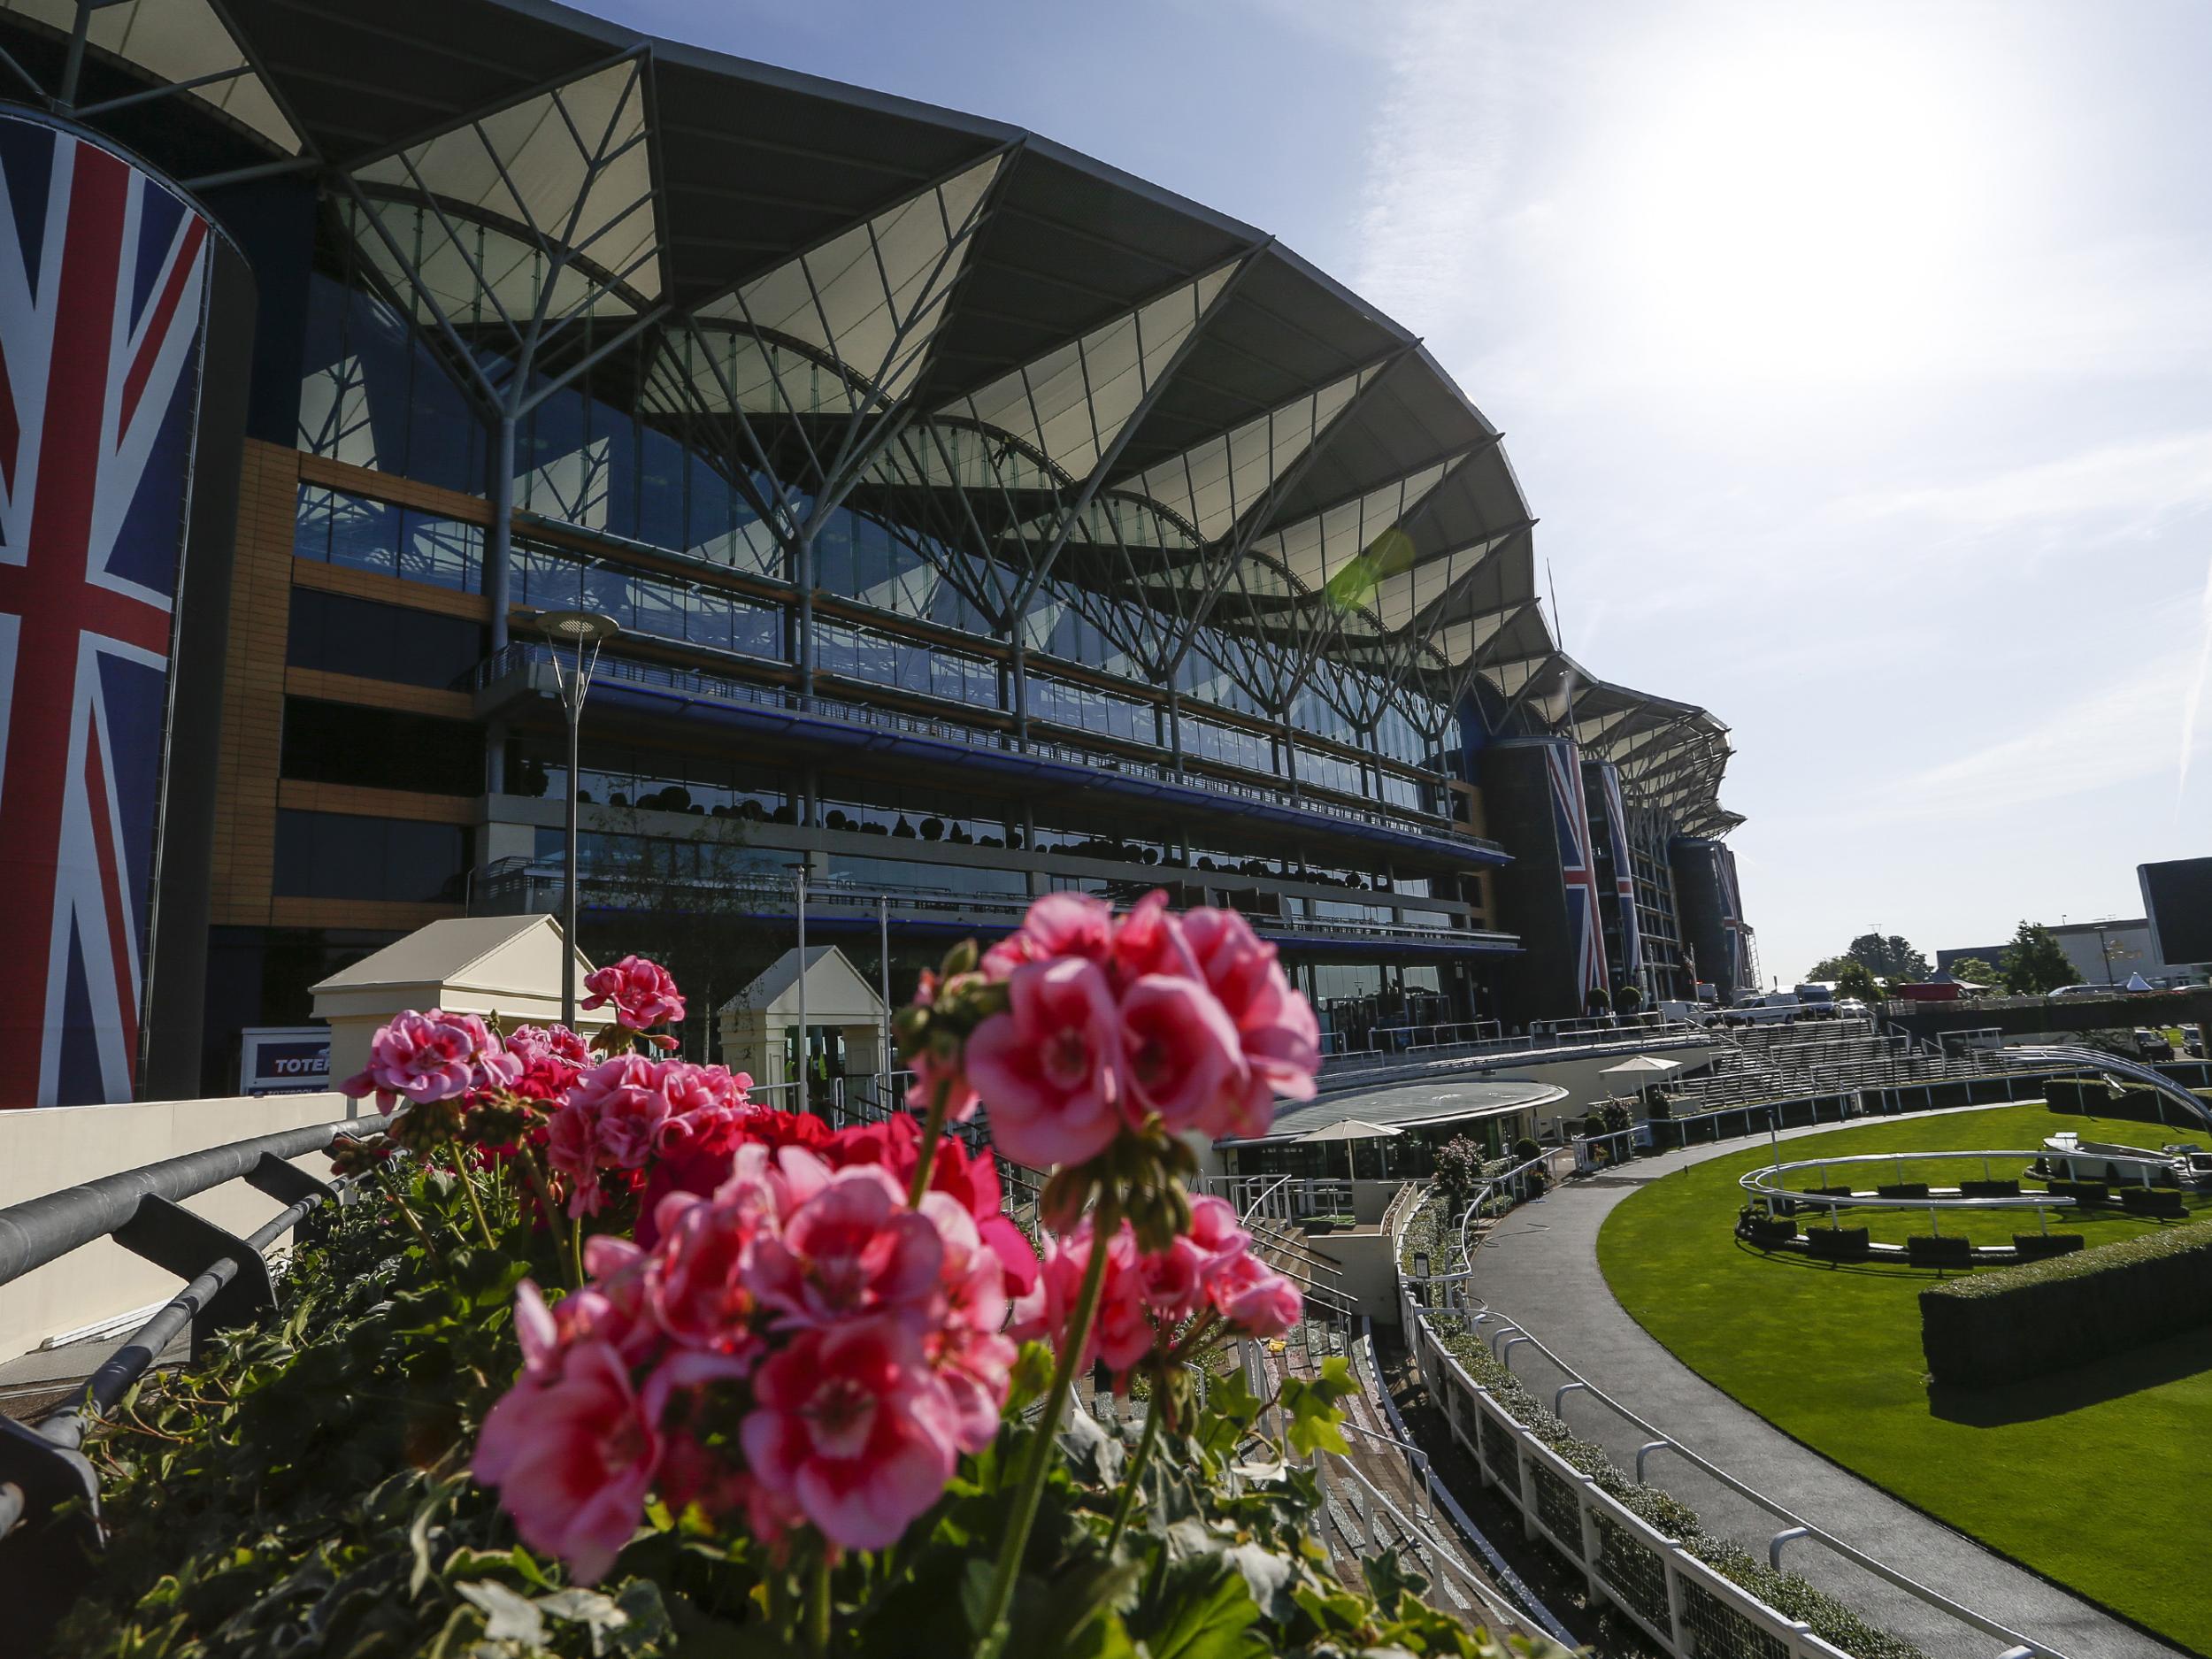 Ascot is one of the high points of the British sporting summer